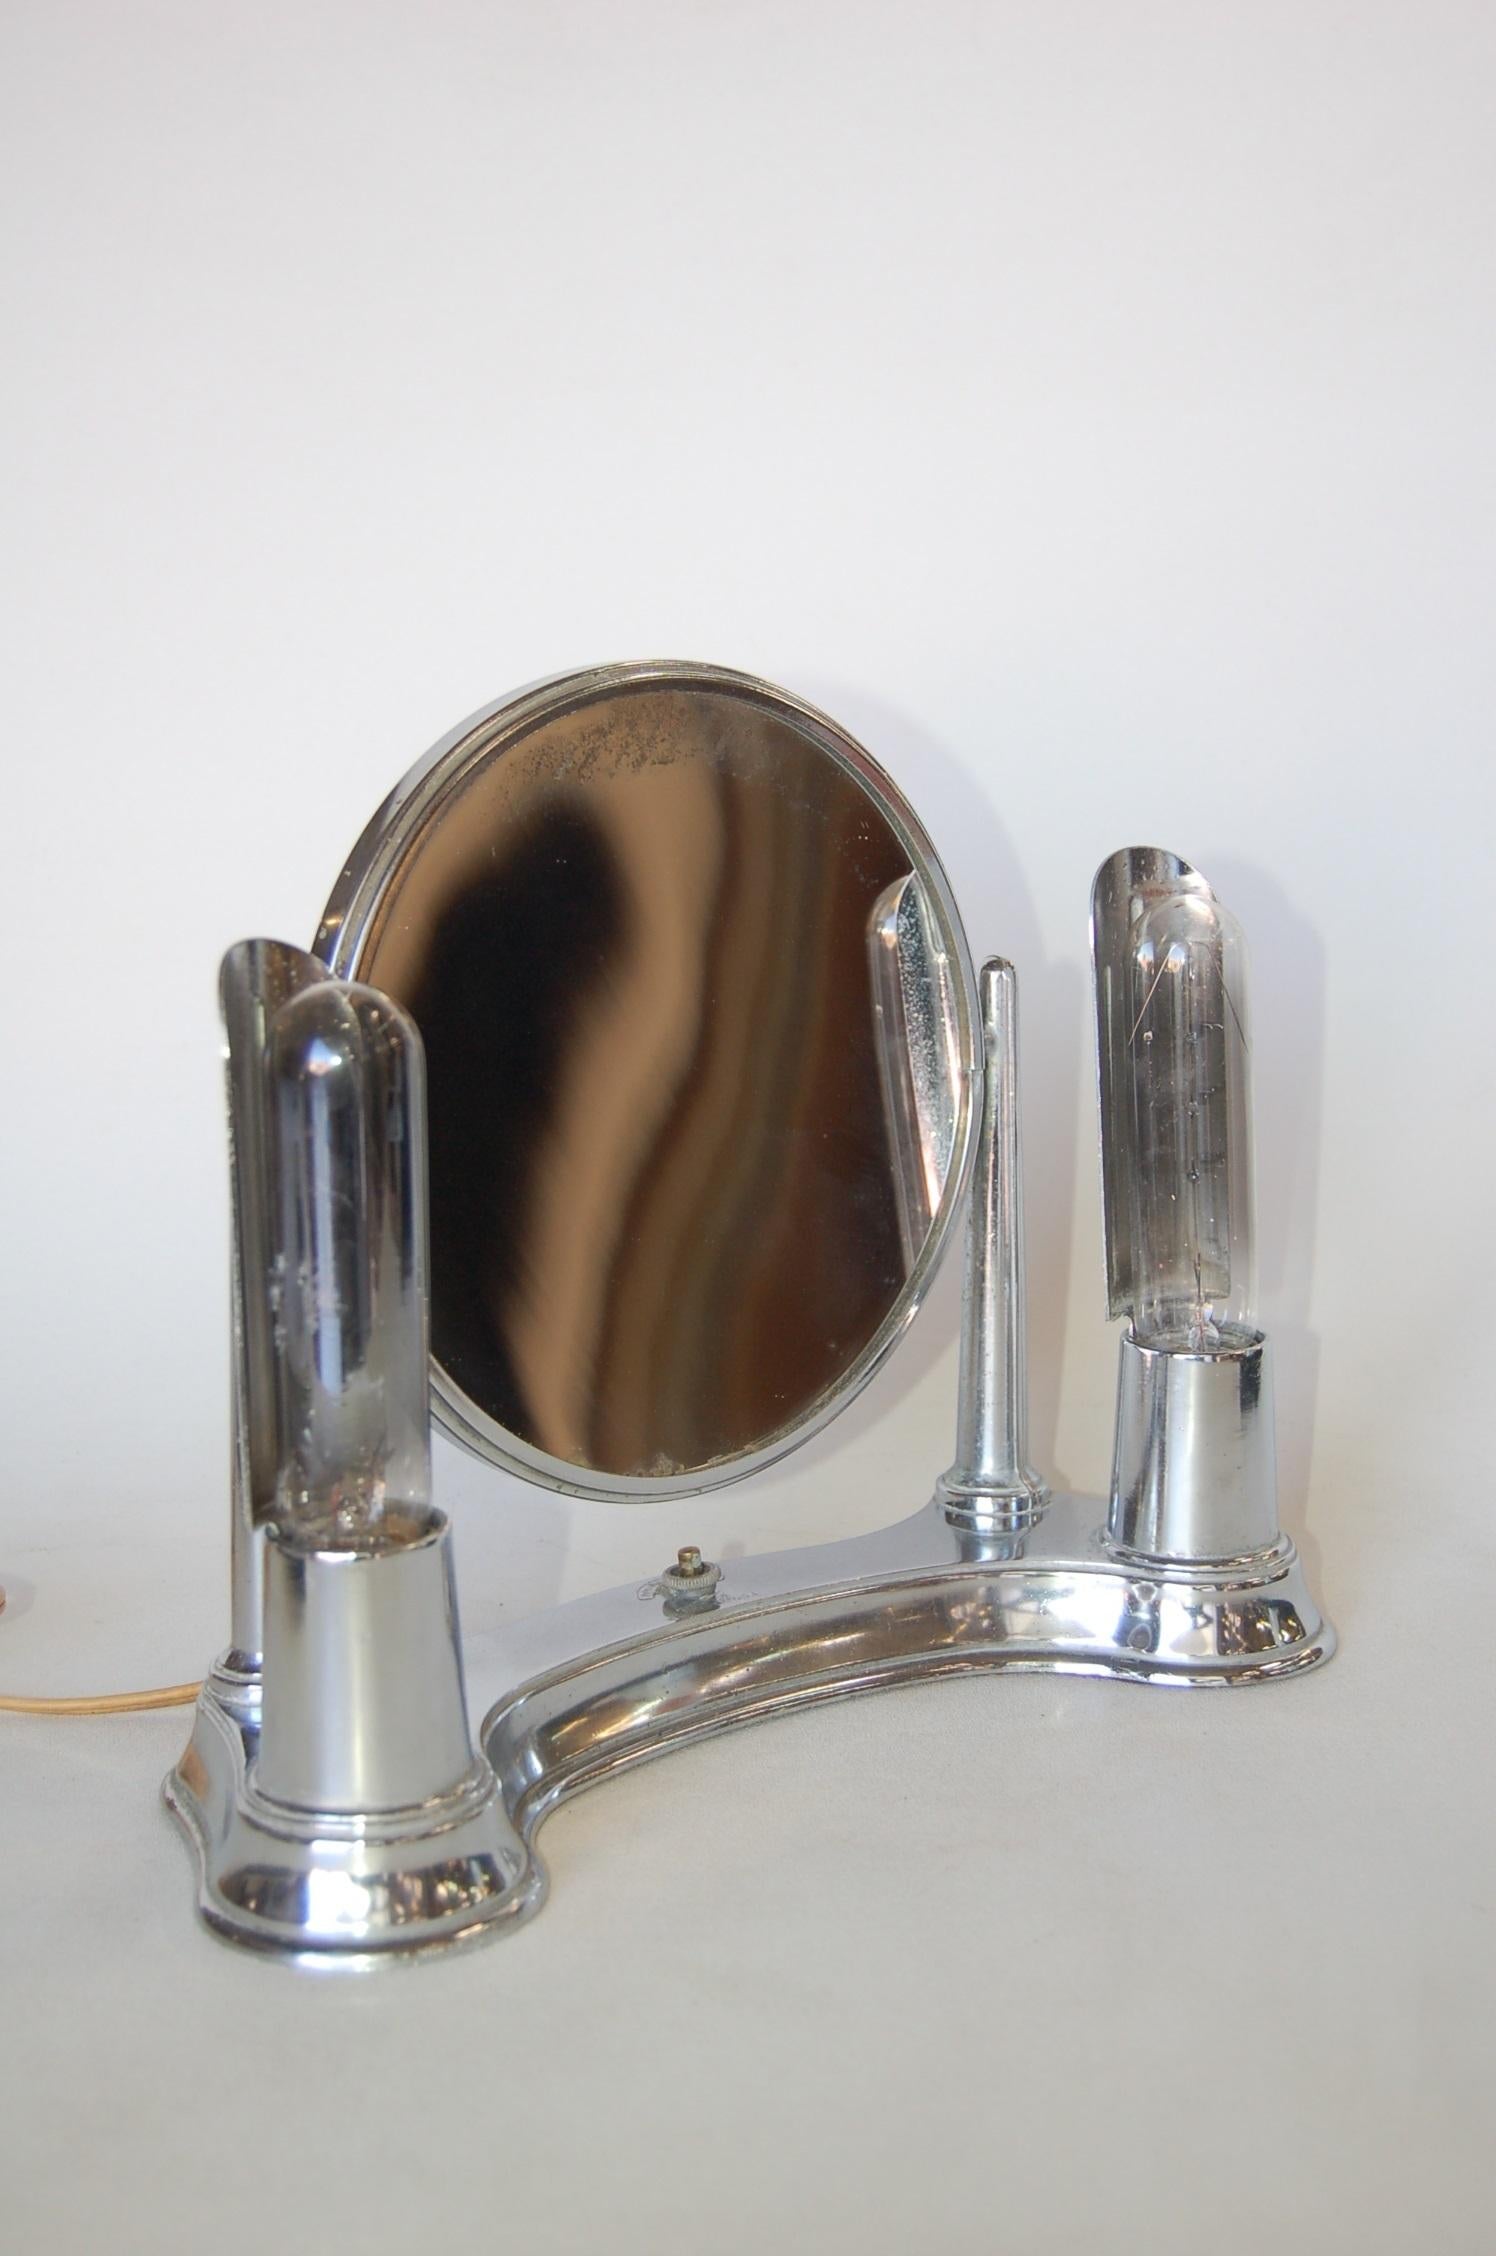 Art Deco chrome lightup vanity makeup magnifying mirror by Bel-Ayre. Takes two 400 watt bulbs. On and Off button.

Measures: 10